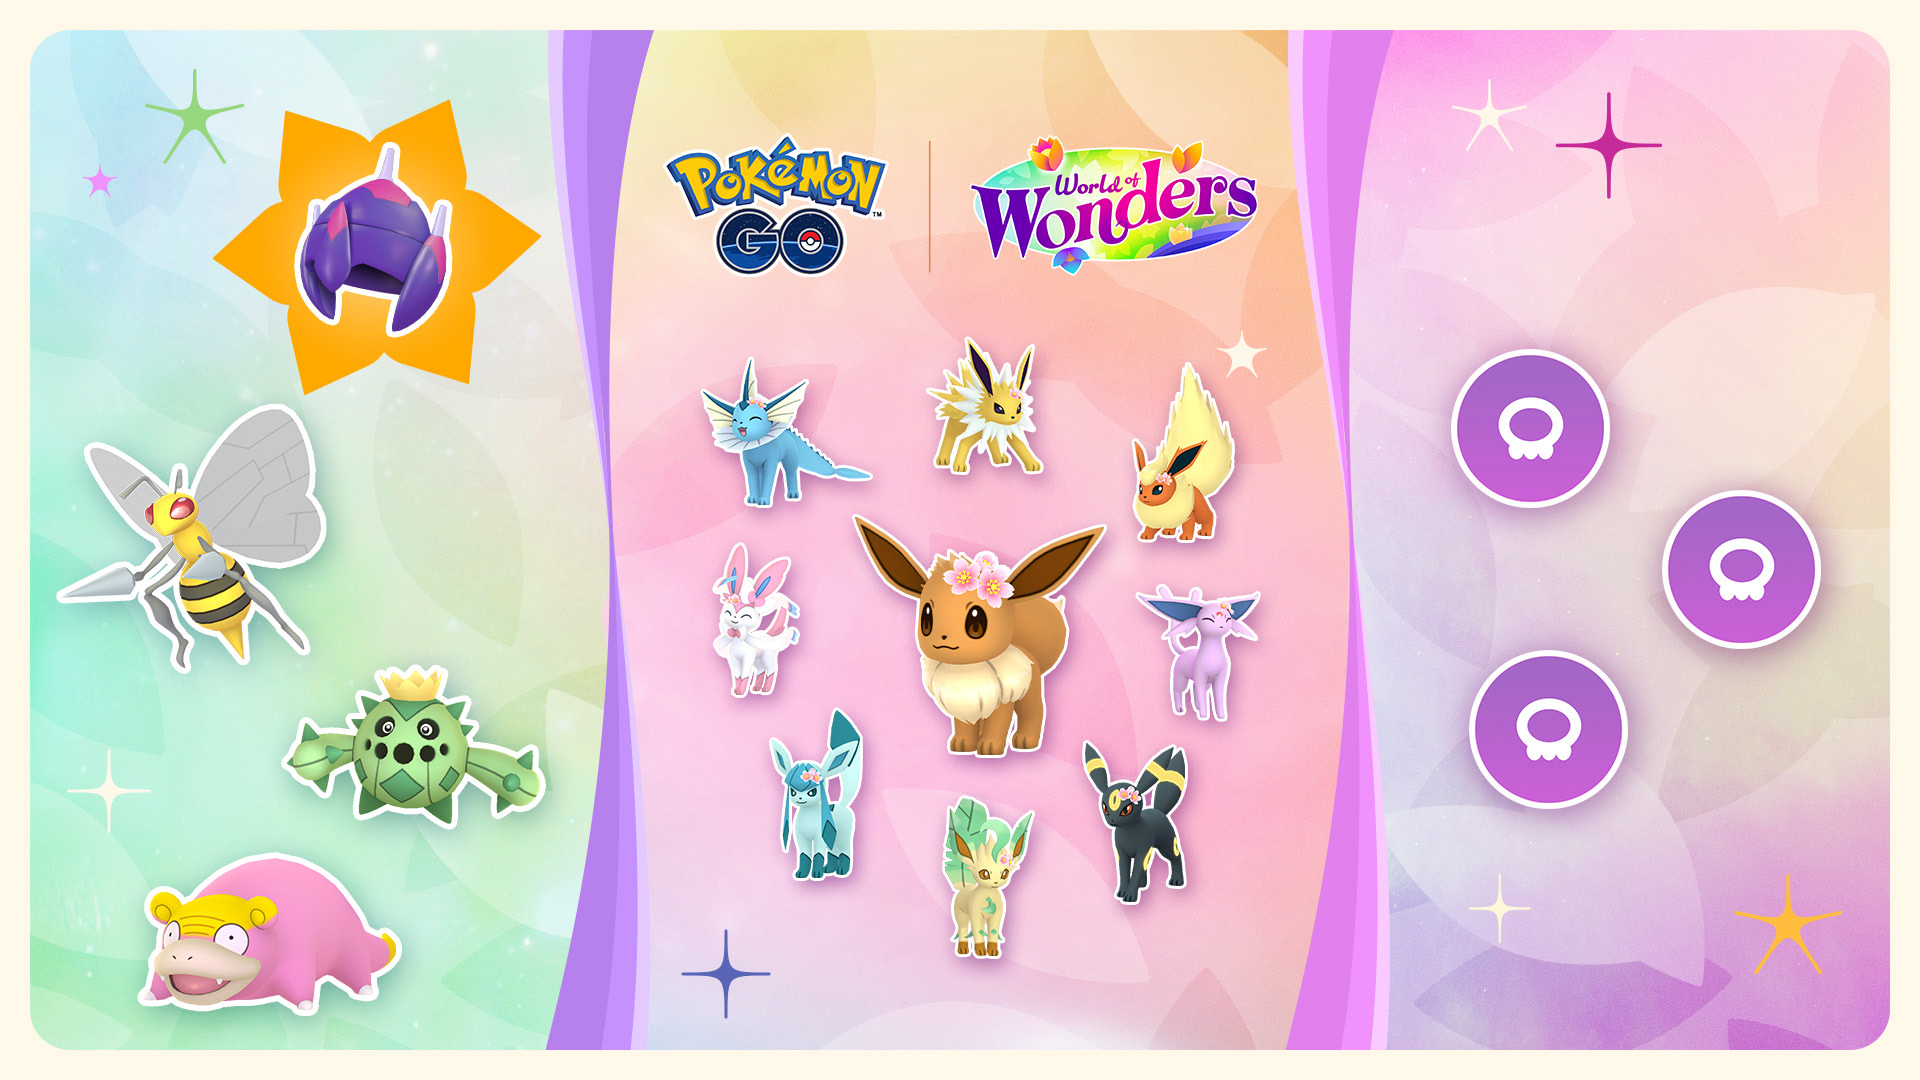 Continue your journey through World of Wonders with the Wonder Ticket Part 2, and experience wonders with Eevee and friends!